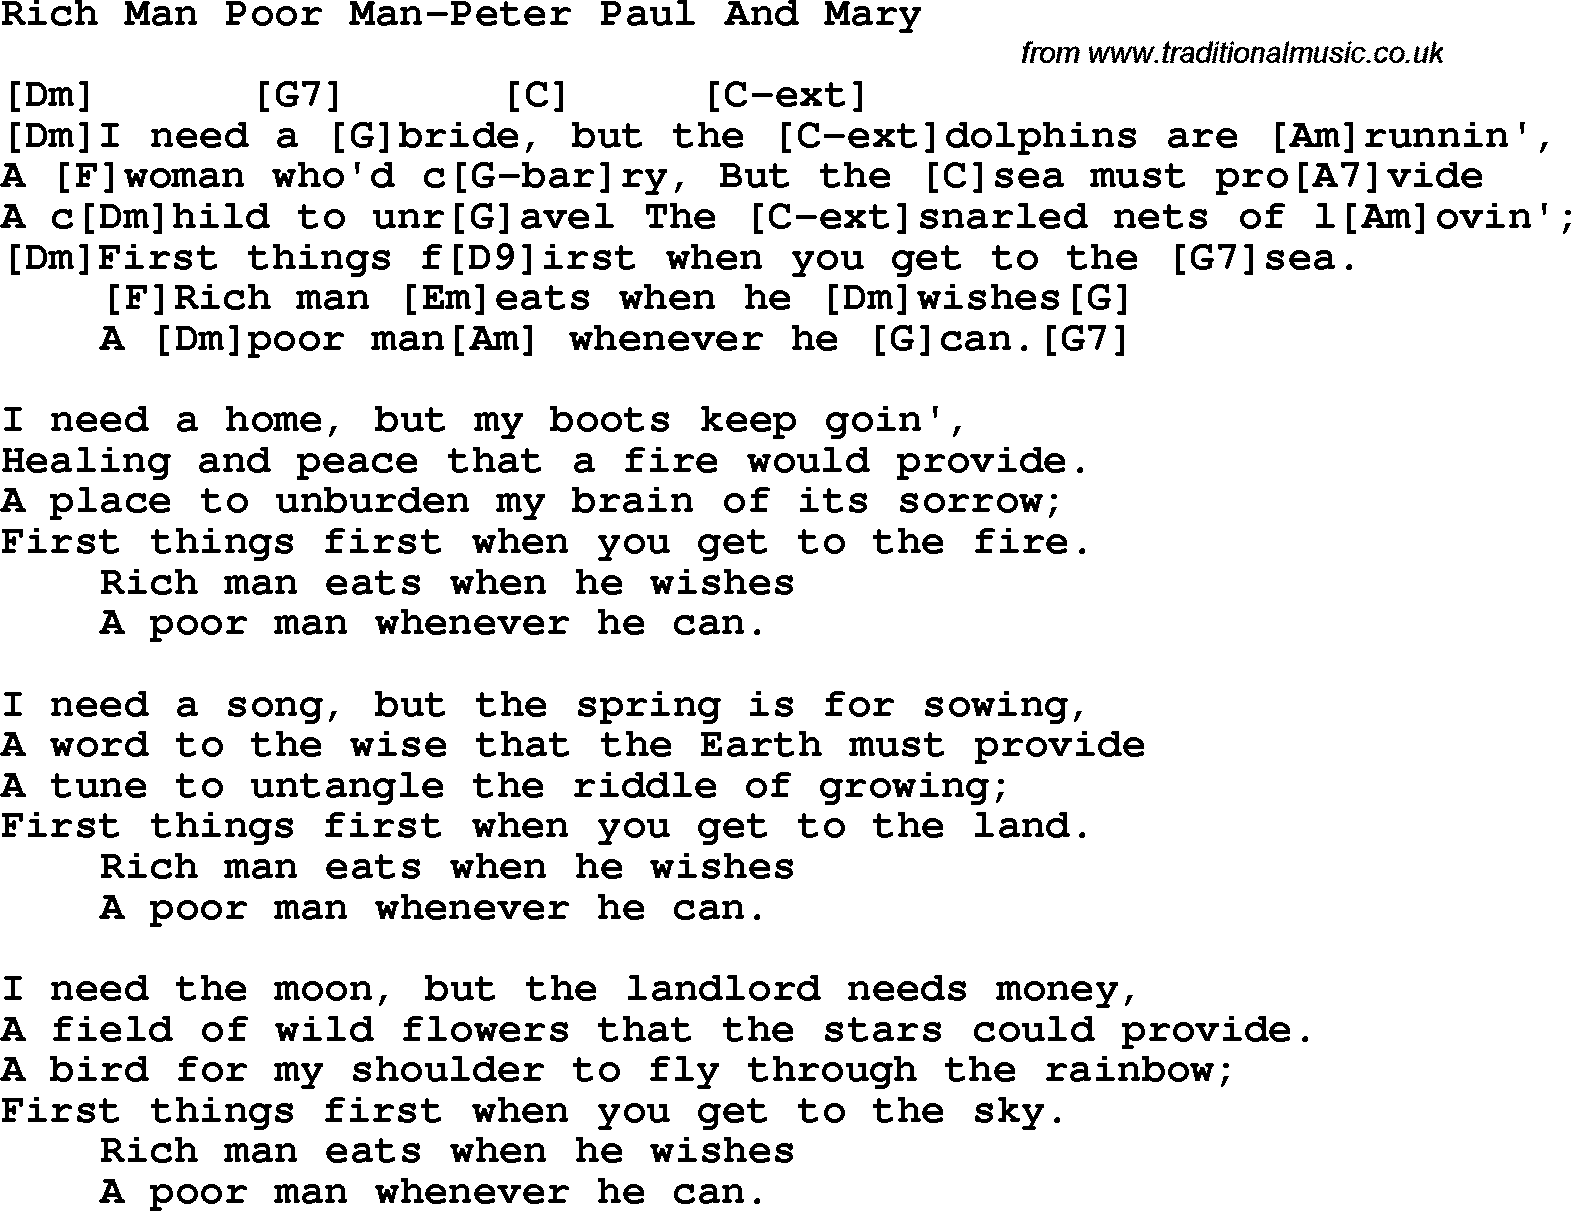 Protest Song Rich Man Poor Man-Peter Paul And Mary lyrics and chords